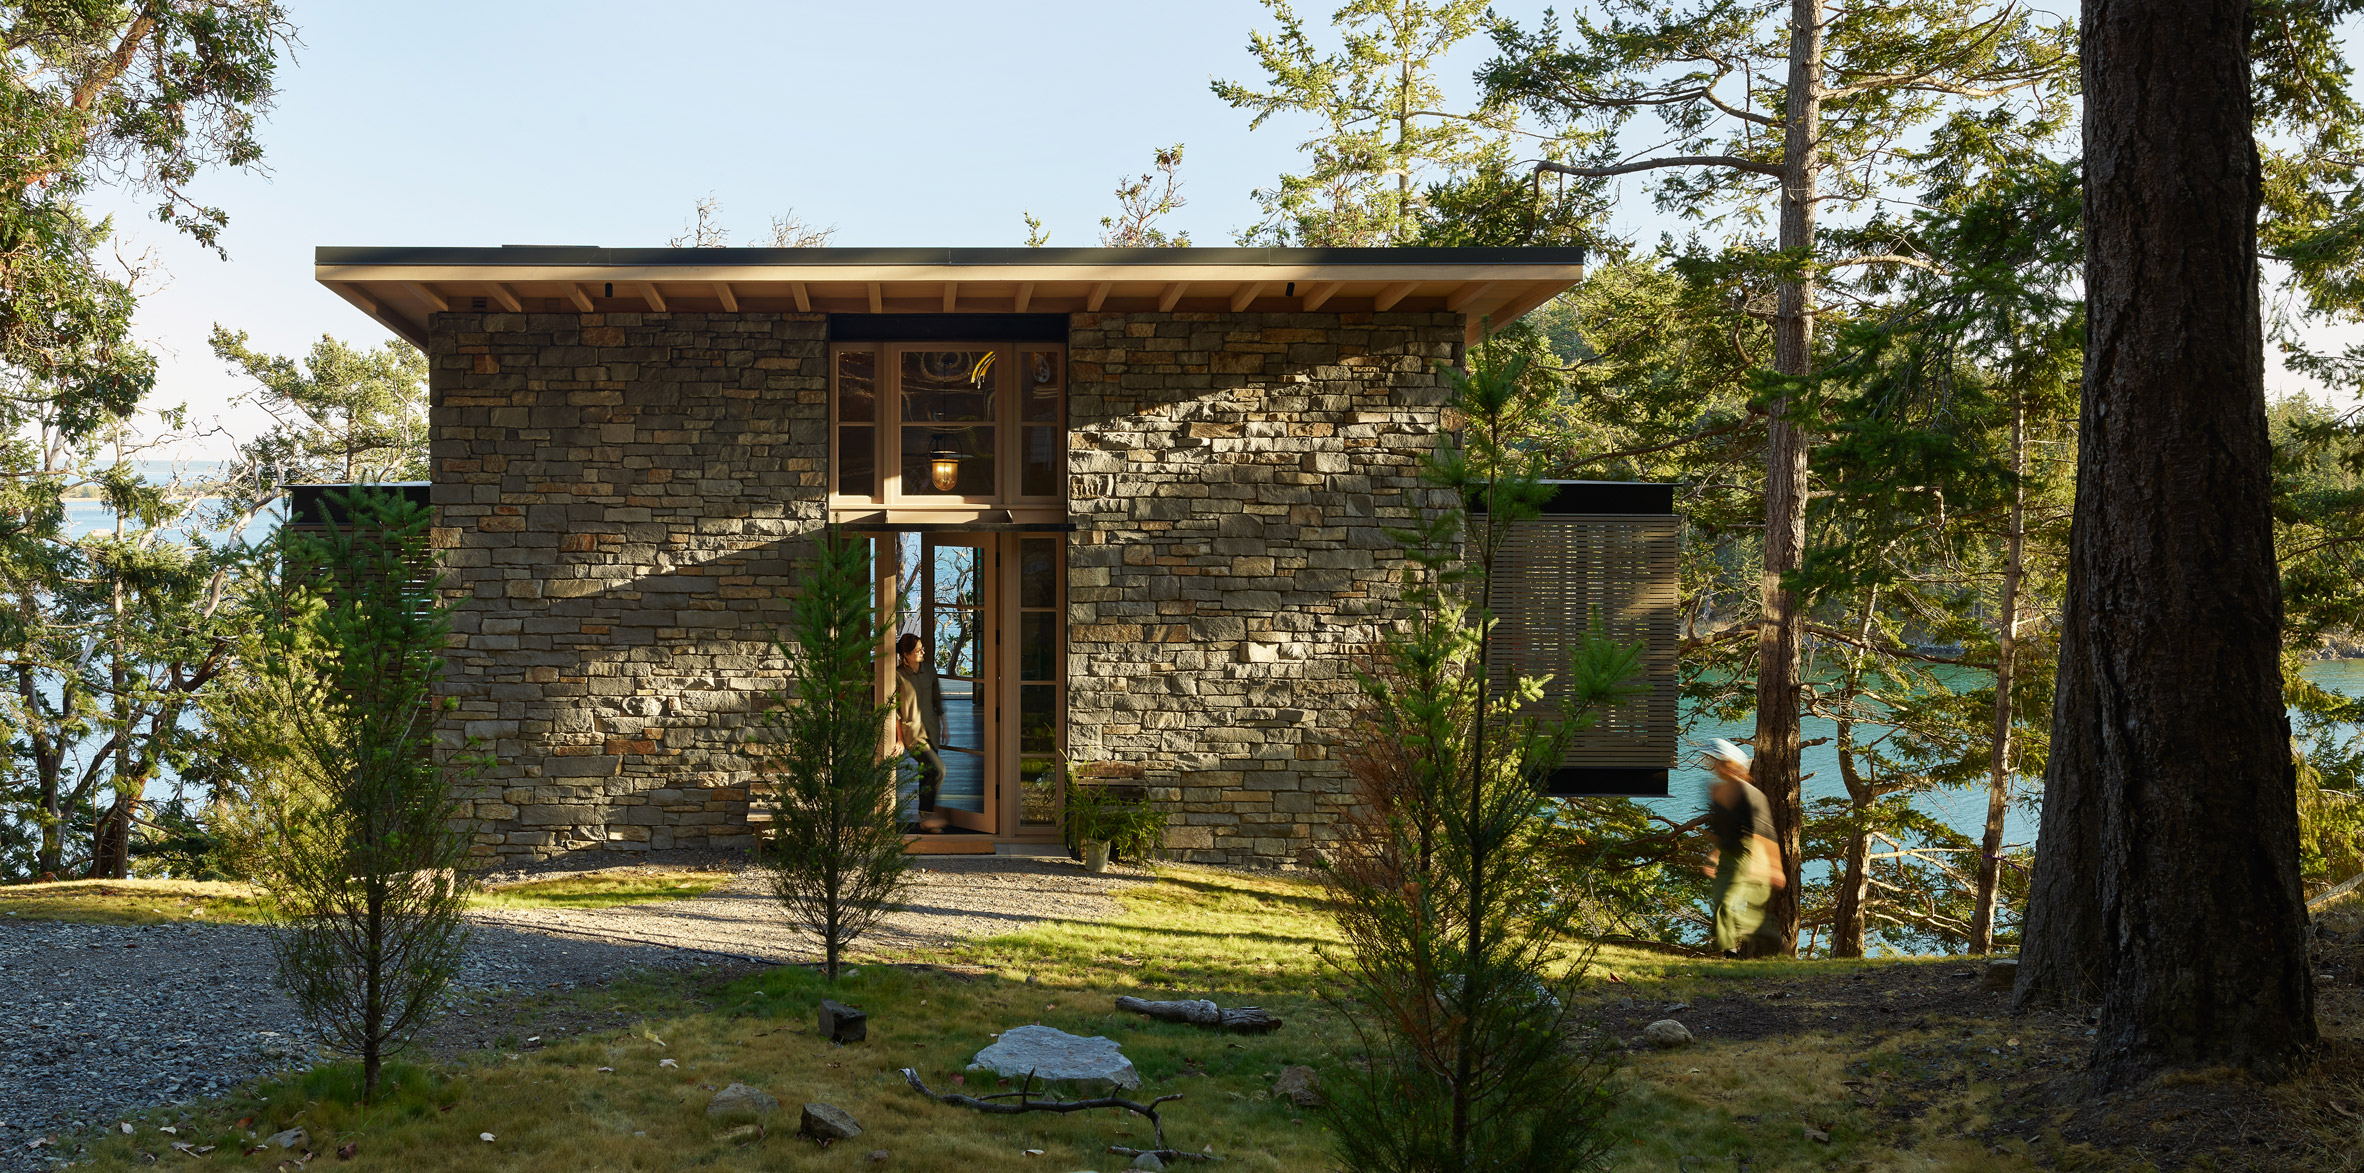 Hillside Sanctuary and guest house by Hoedemaker Pfeiffer in Washington state